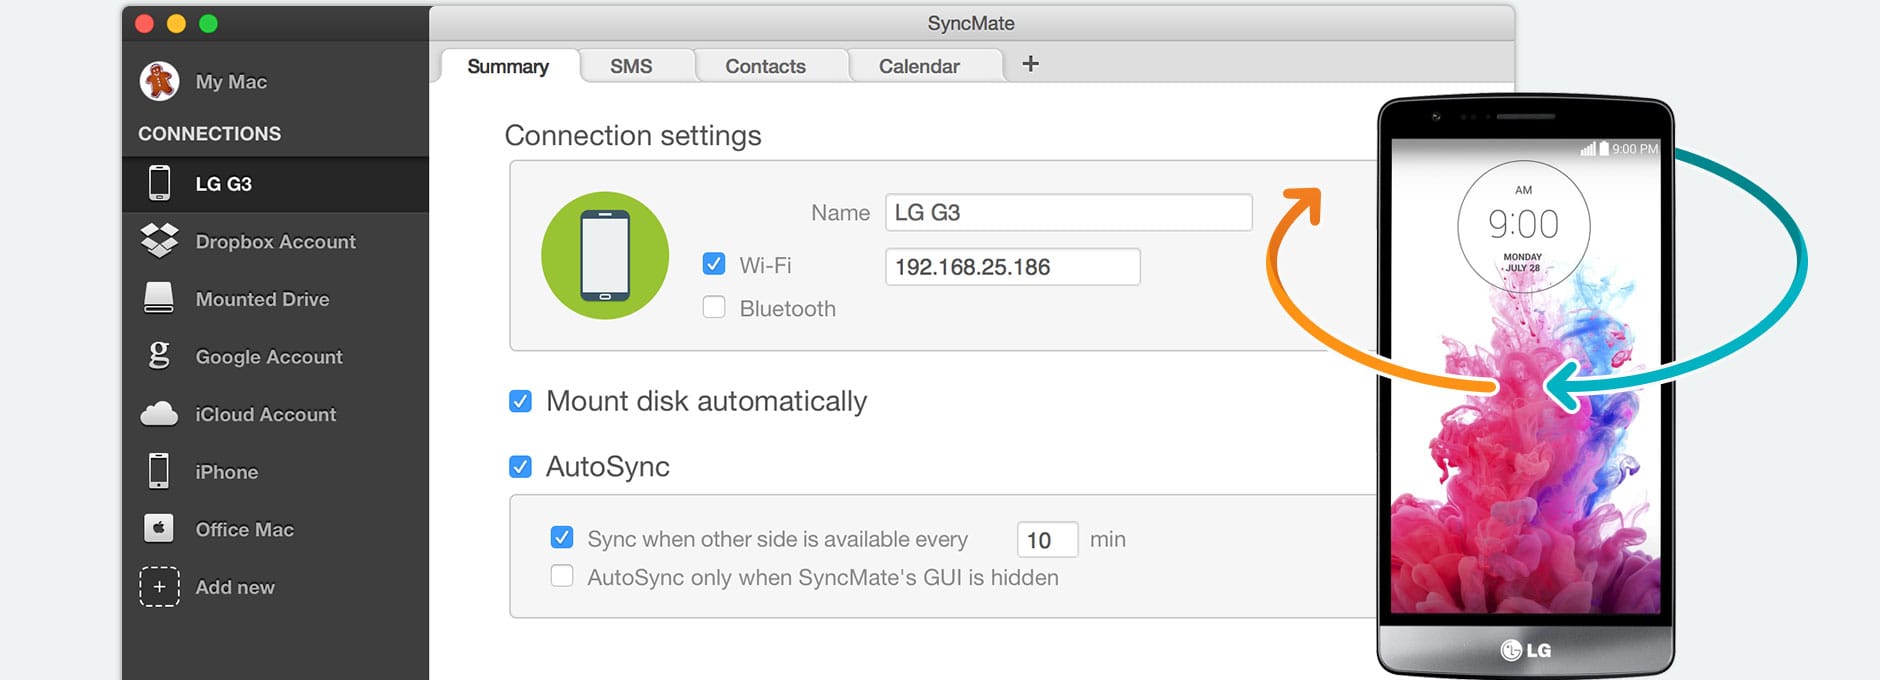 htc sync manager for mac